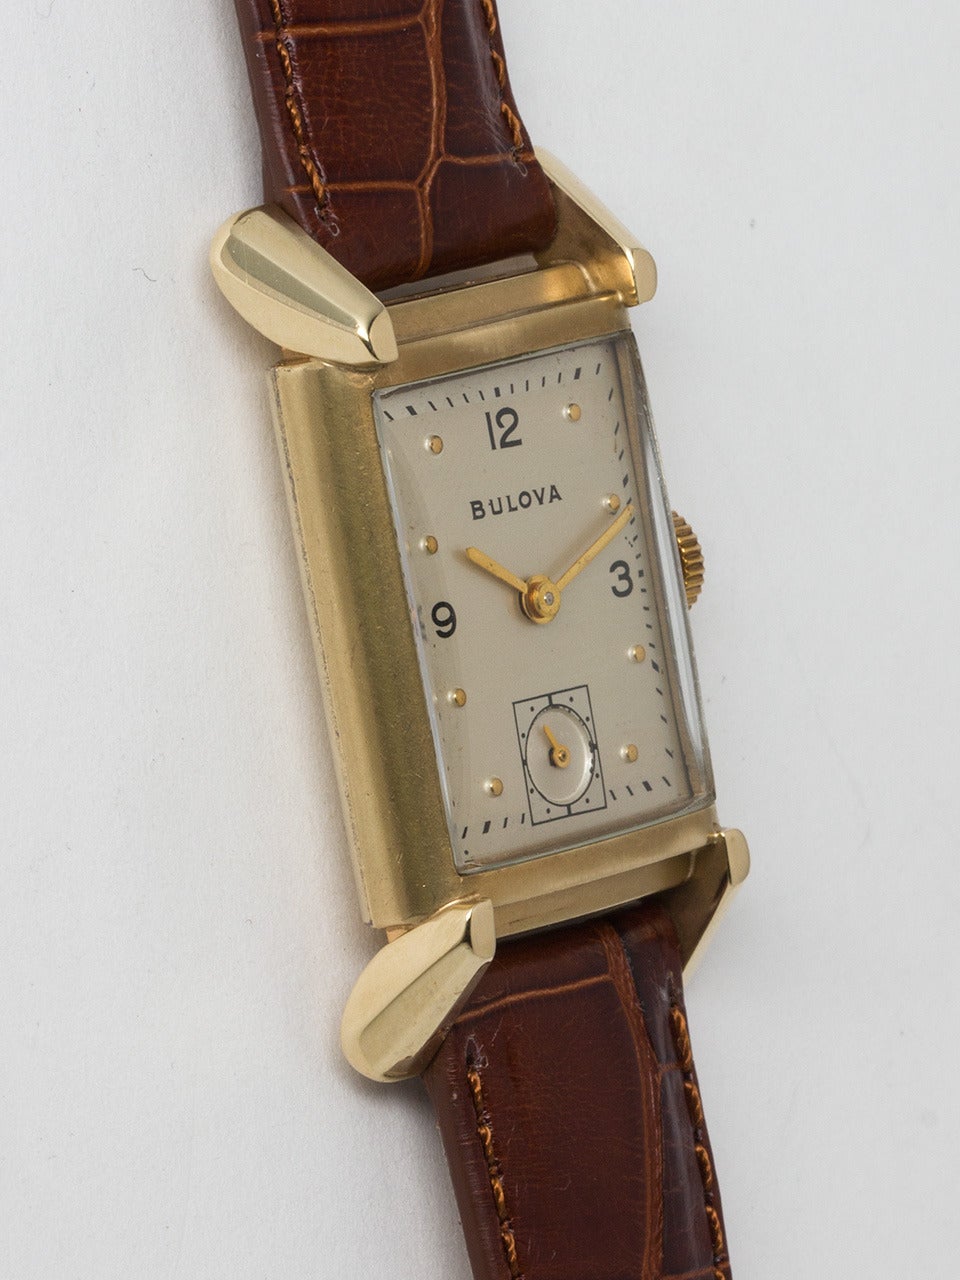 Bulova 14K Yellow Gold Rectangular Dress Watch, circa 1950s. Stylish case measuring 22 X 39mm with large sloped footed lugs. Original silvered satin dial with gold raised dots and printed 3, 9 and 12. Powered by 17 jewel manual wind movement with